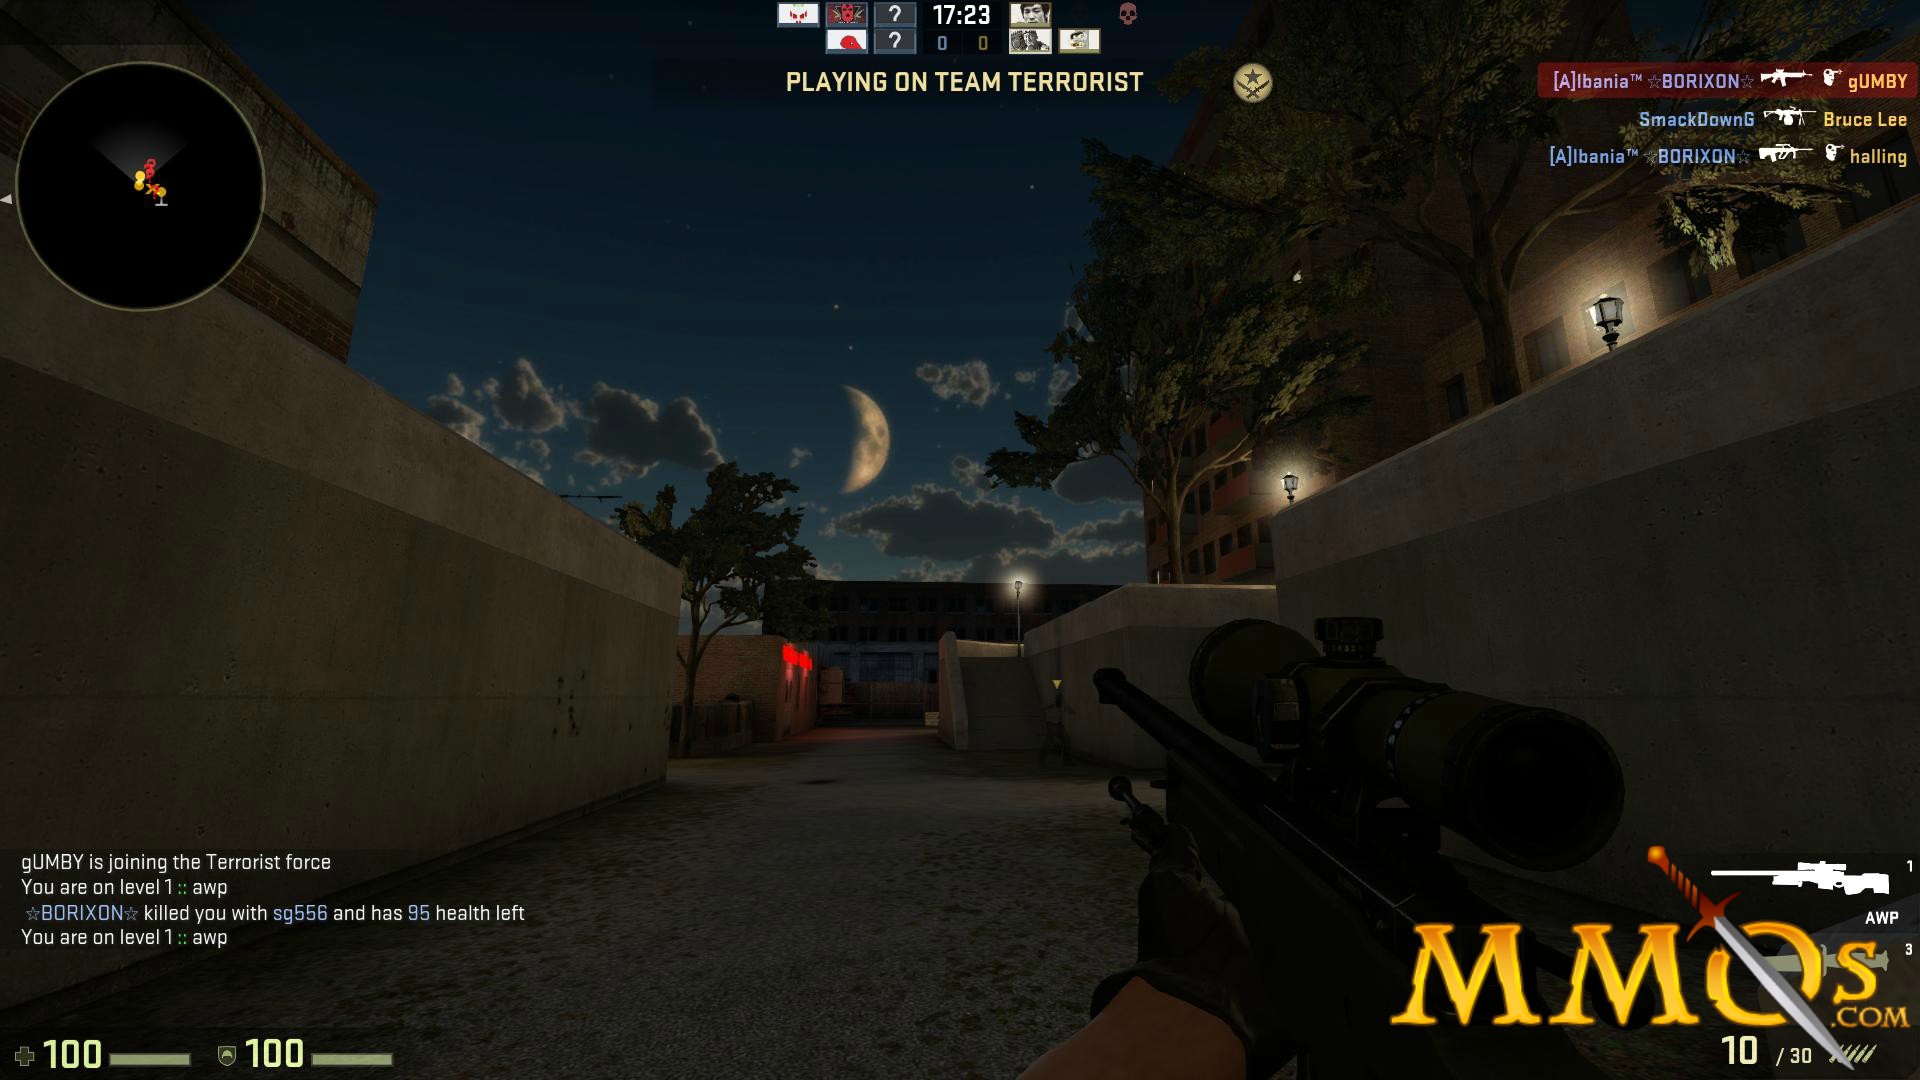 Valve says that not enough players play Counter-Strike 2 on macOS - Xfire